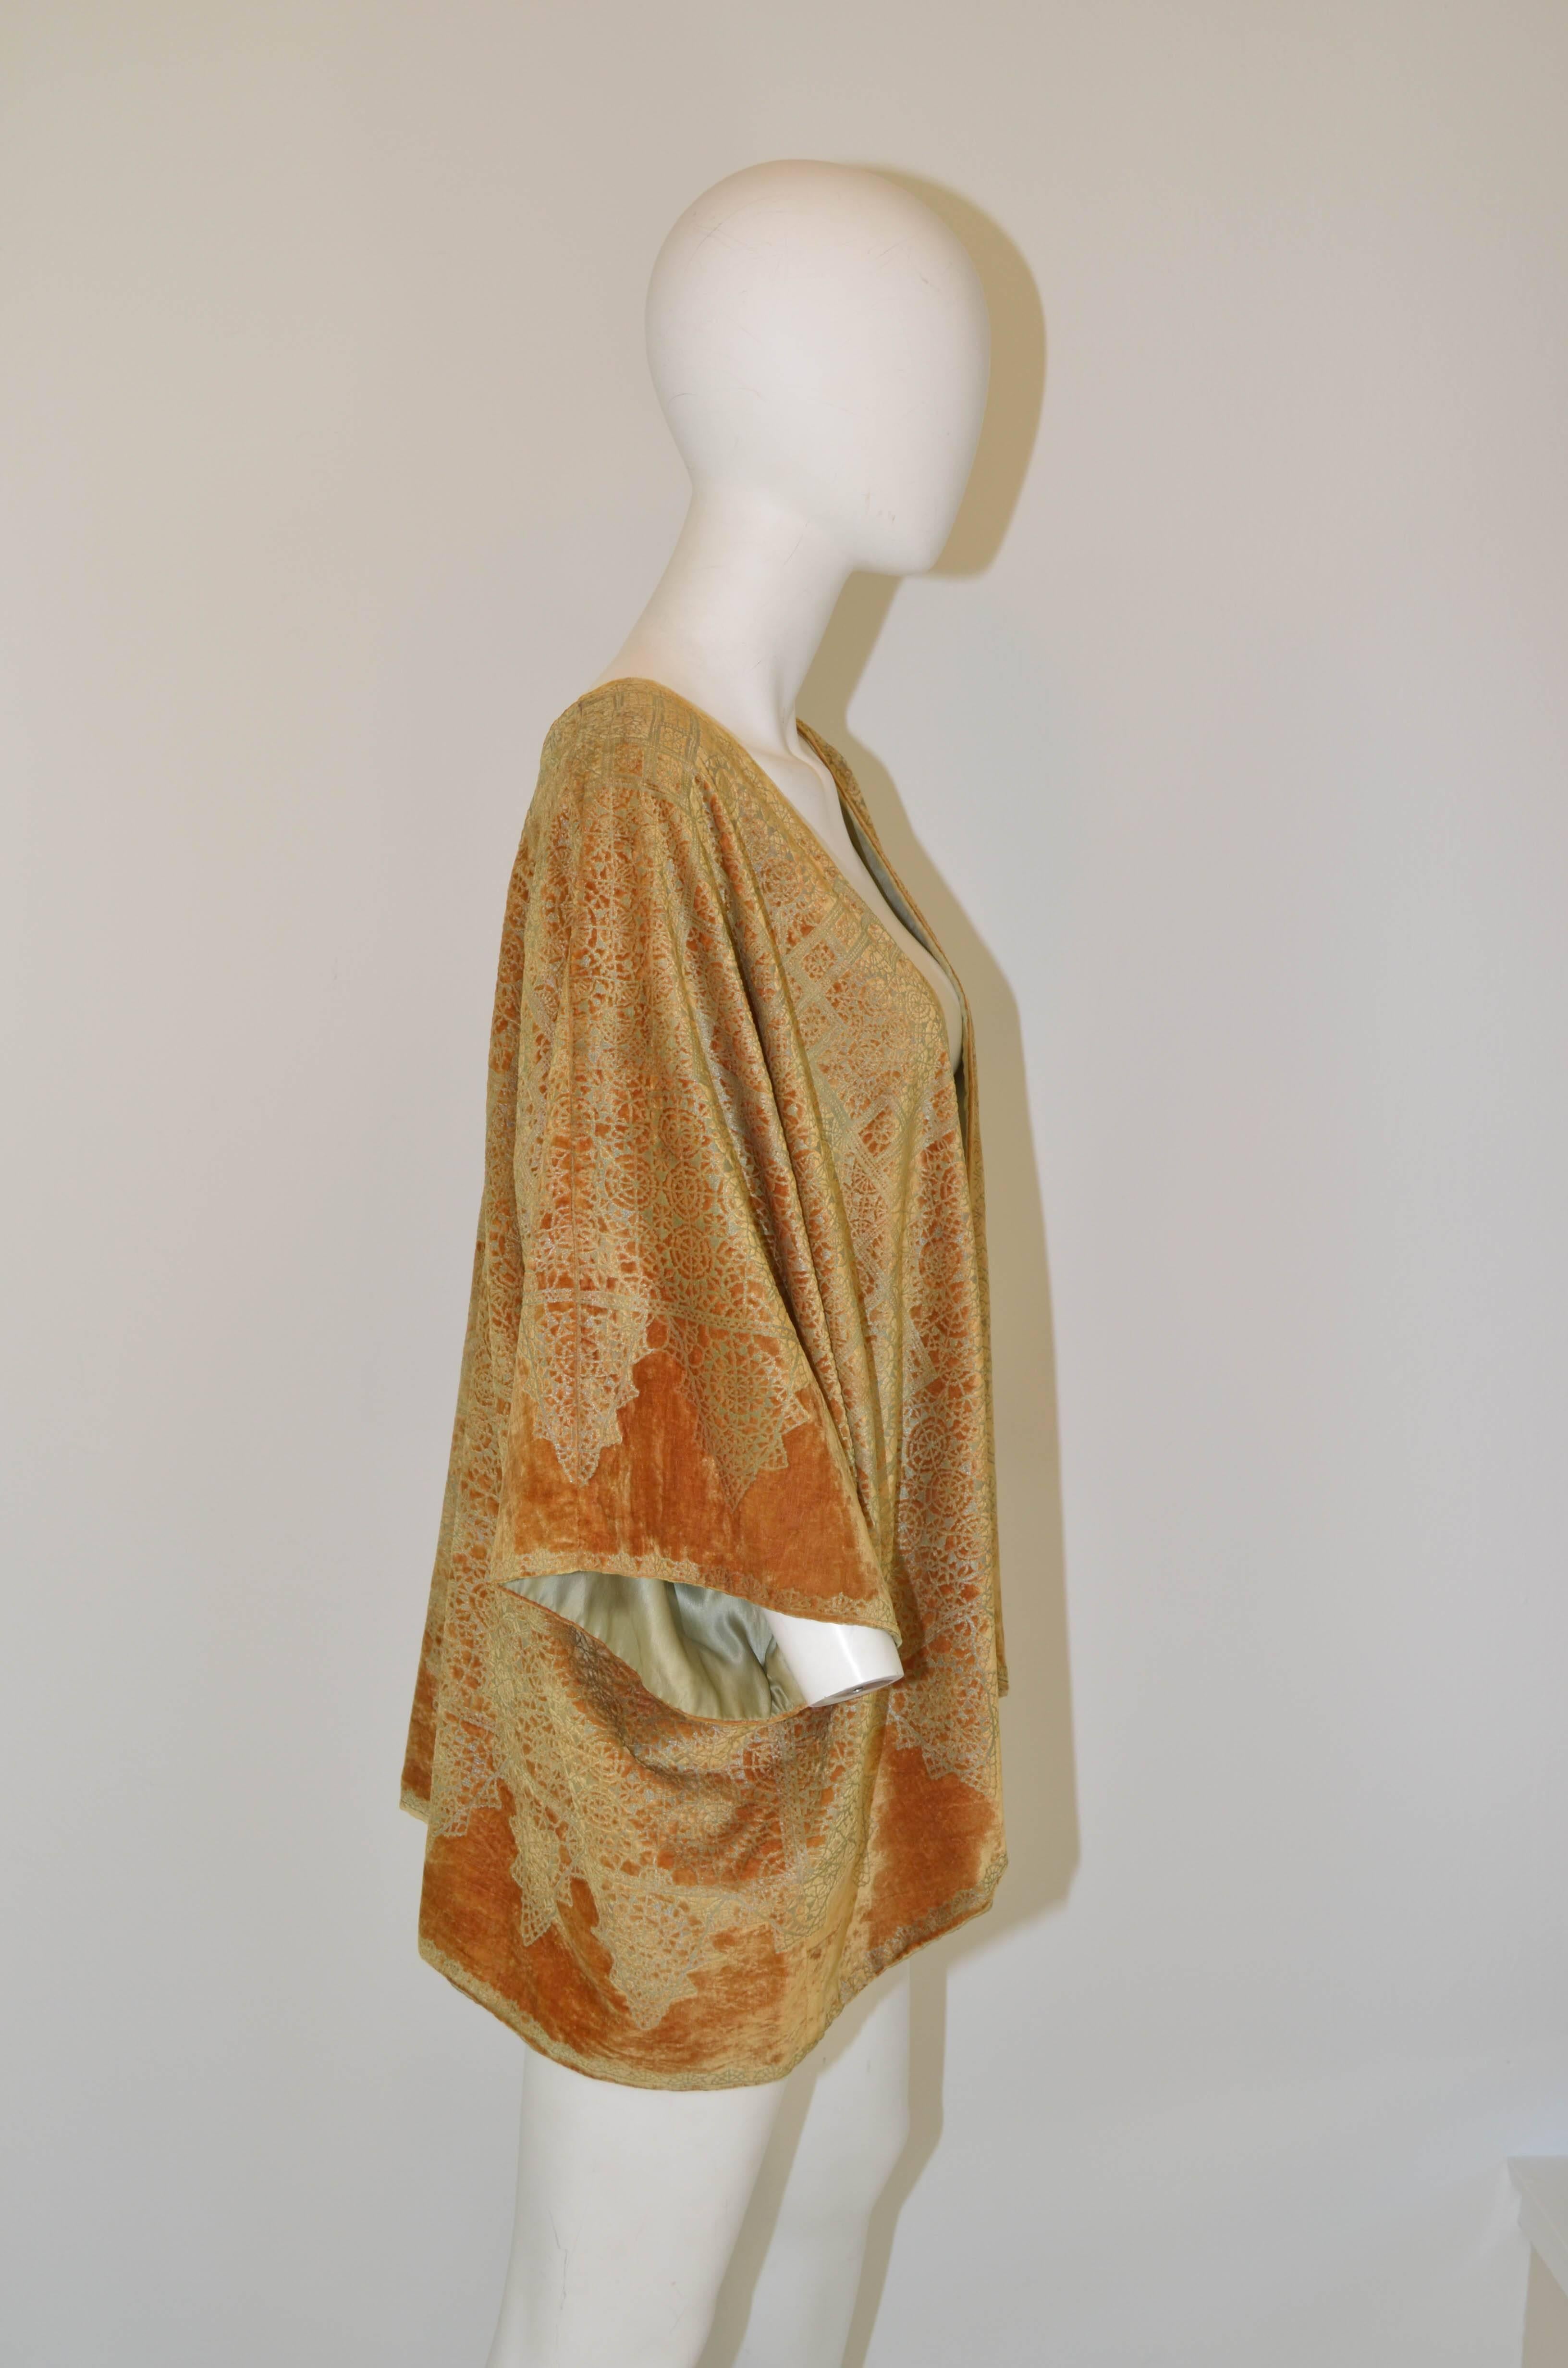 Mariano Fortuny Rare Saffron Gold Stenciled Velvet Evening Jacket
Label at neck, Original silk lining
Excellent condition, some fraying to neck of silk lining.


Measurements:
End of sleeve to end of sleeve 47 across
Length shoulder to hem 28